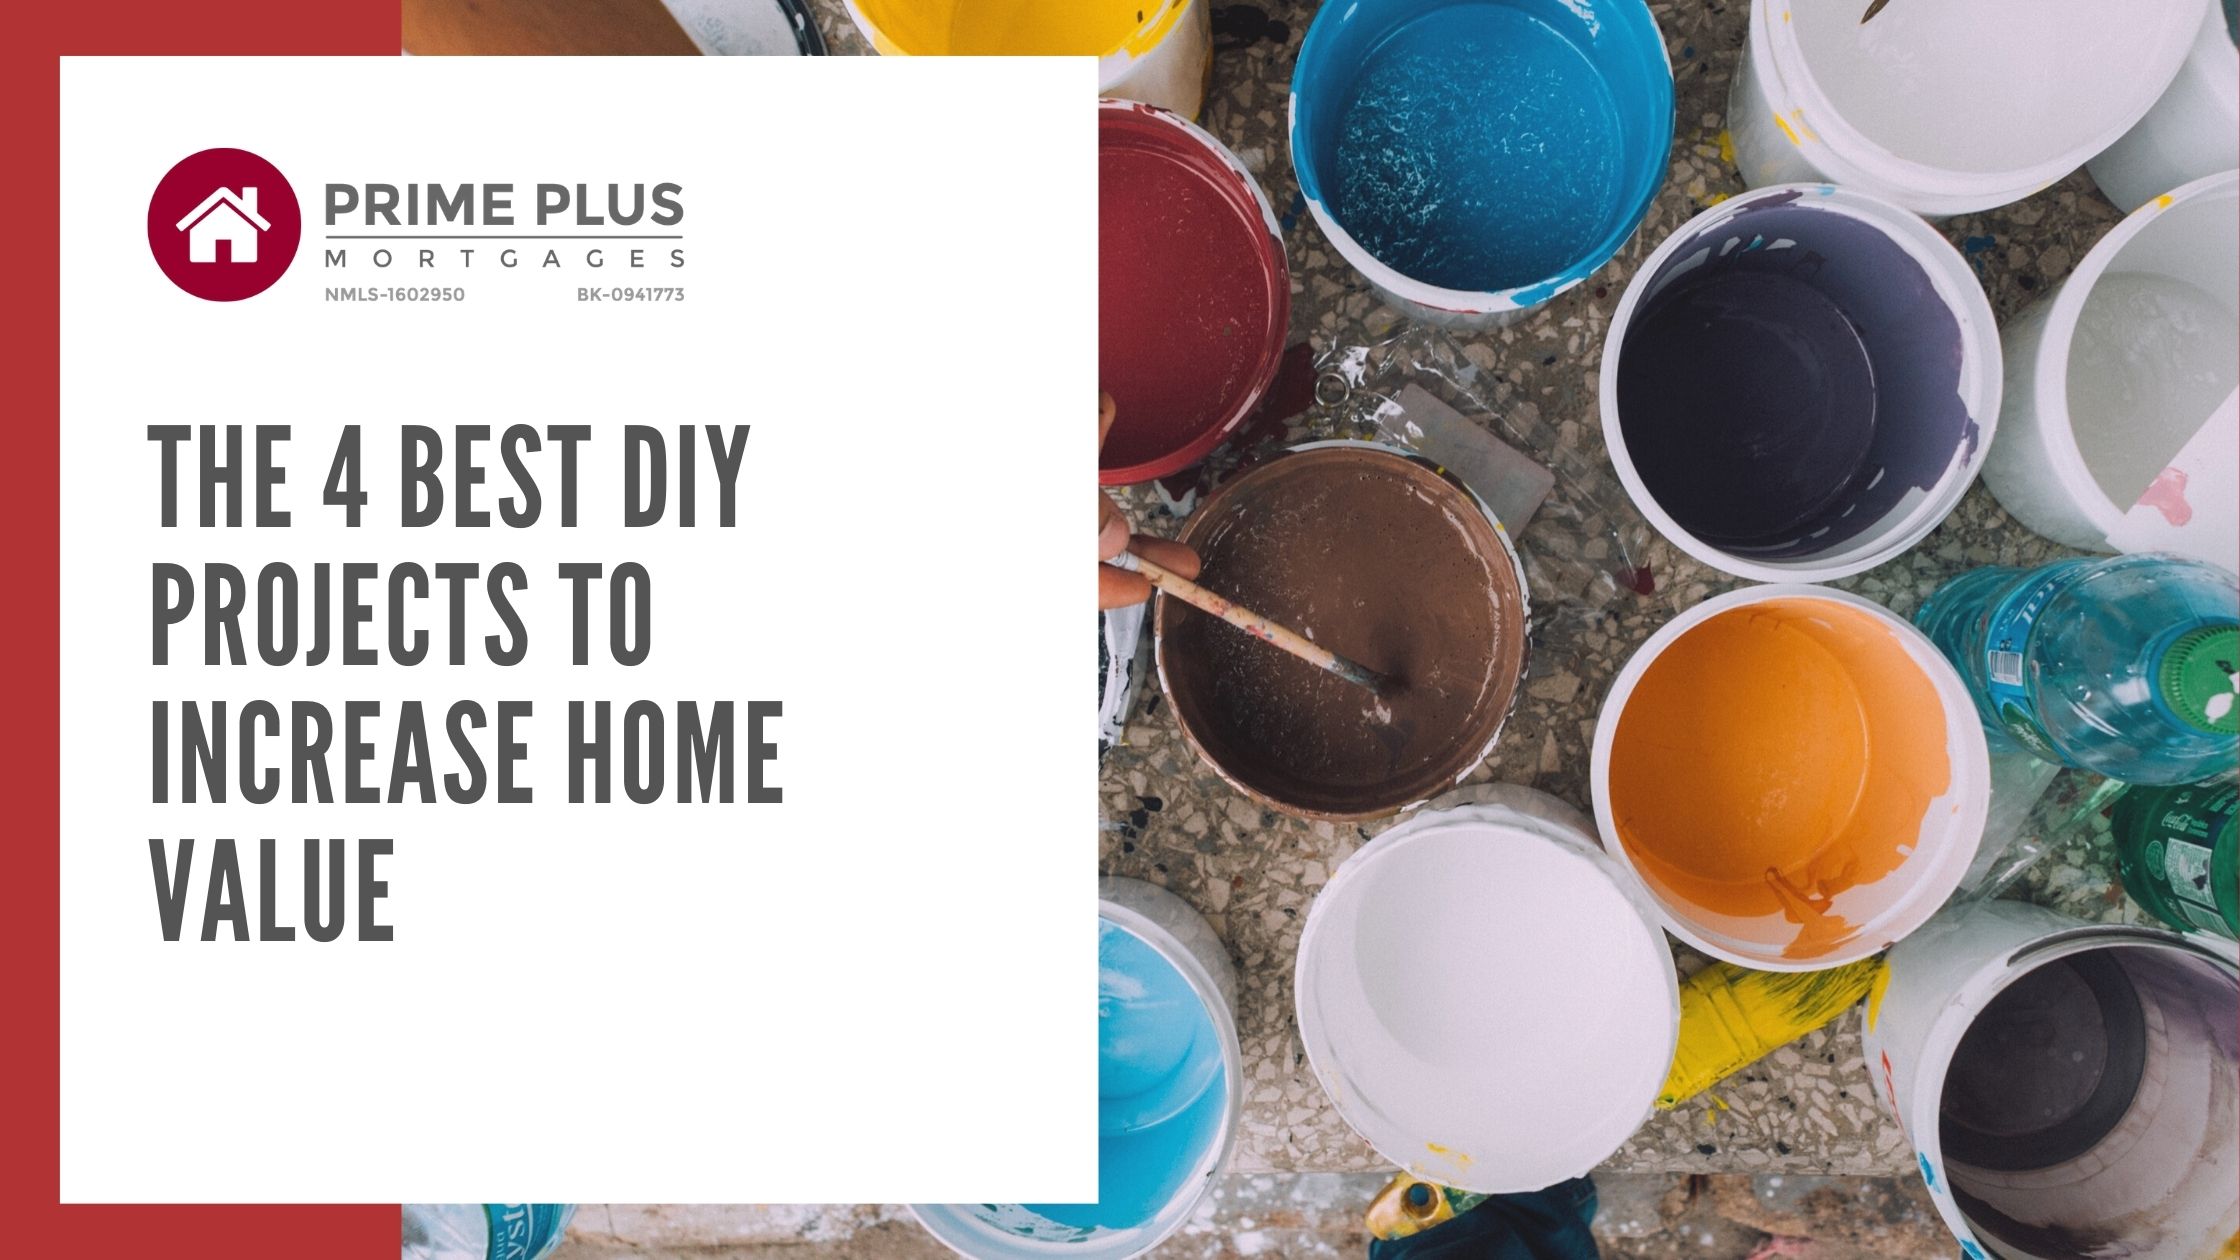 The 4 Best Diy Projects To Increase Home Value